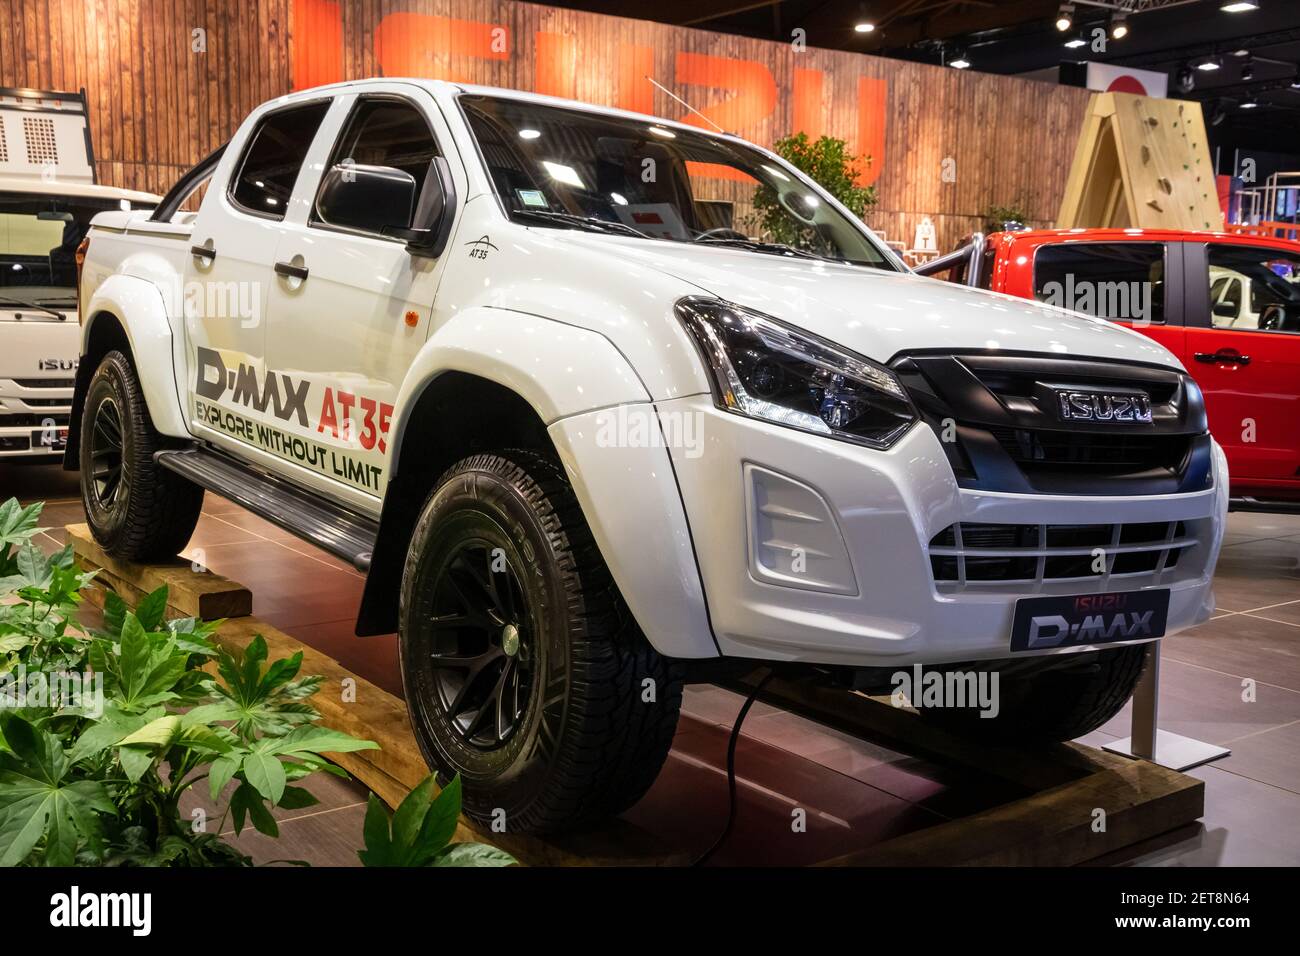 Isuzu D-Max AT35 Artic pick-up truck at the Brussels Autosalon Motor Show. Belgium - January 18, 2019. Stock Photo